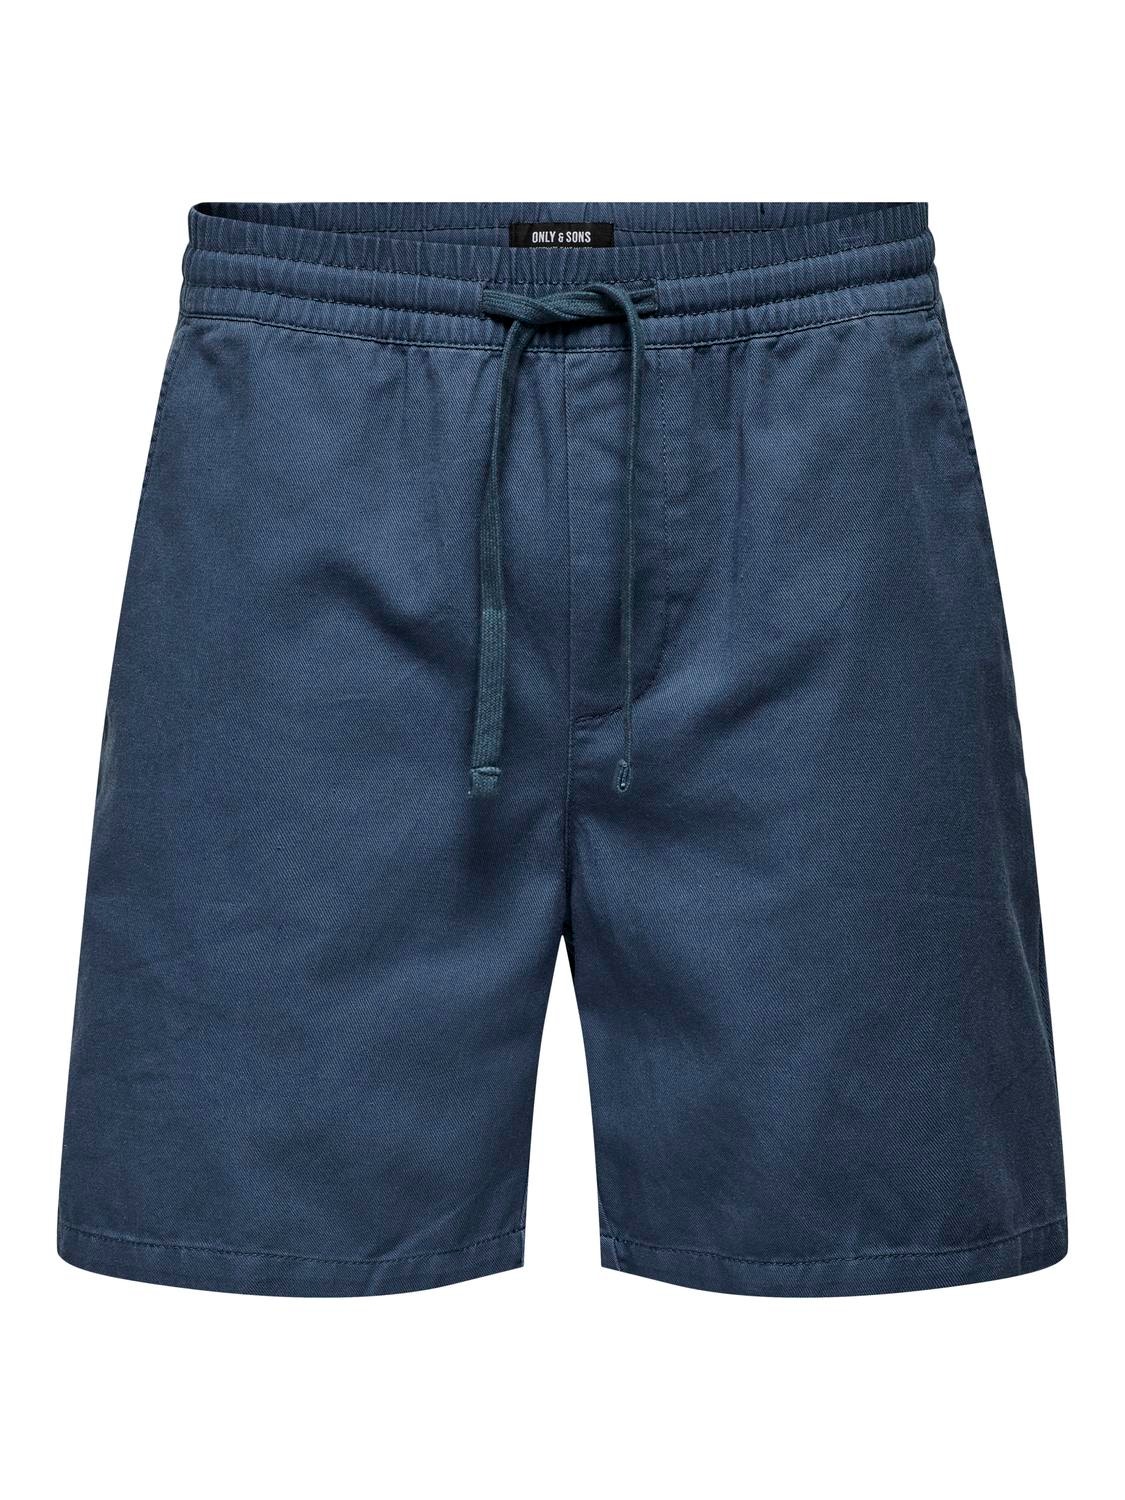 ONLY & SONS Regular Fit Mid rise Shorts -Sargasso Sea - 22025790